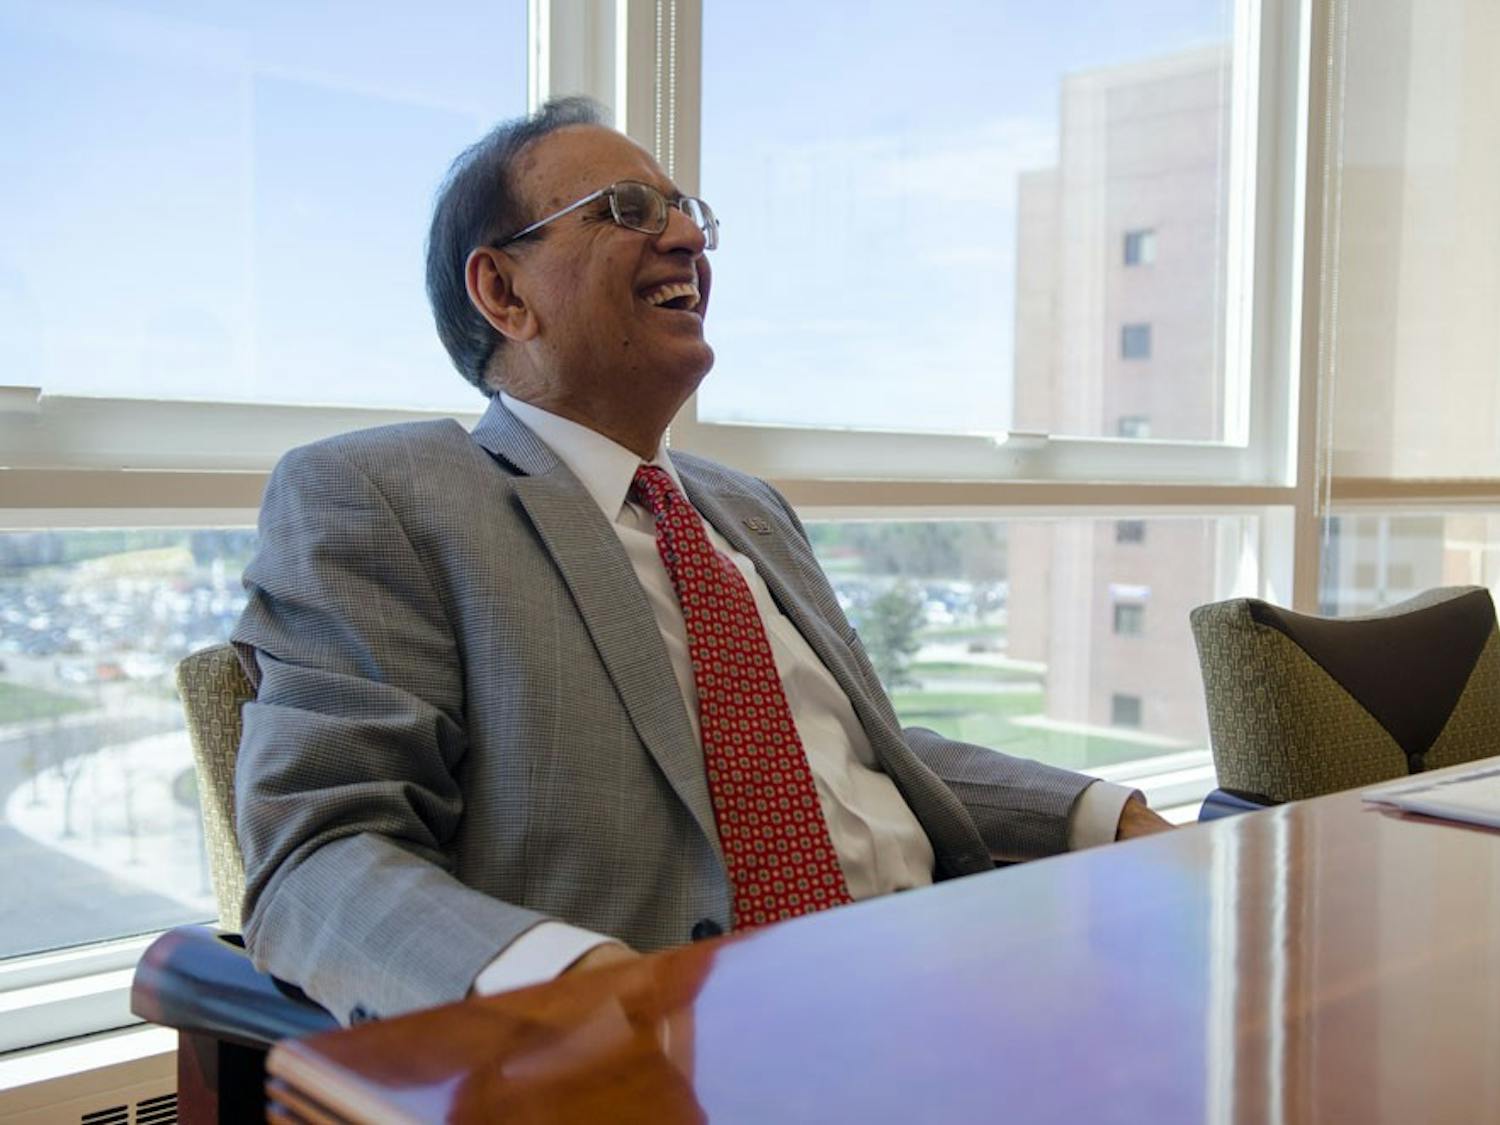 President Satish Tripathi sat down with Spectrum EIC Sara DiNatale last week to talk about some of the bigger topics facing UB.